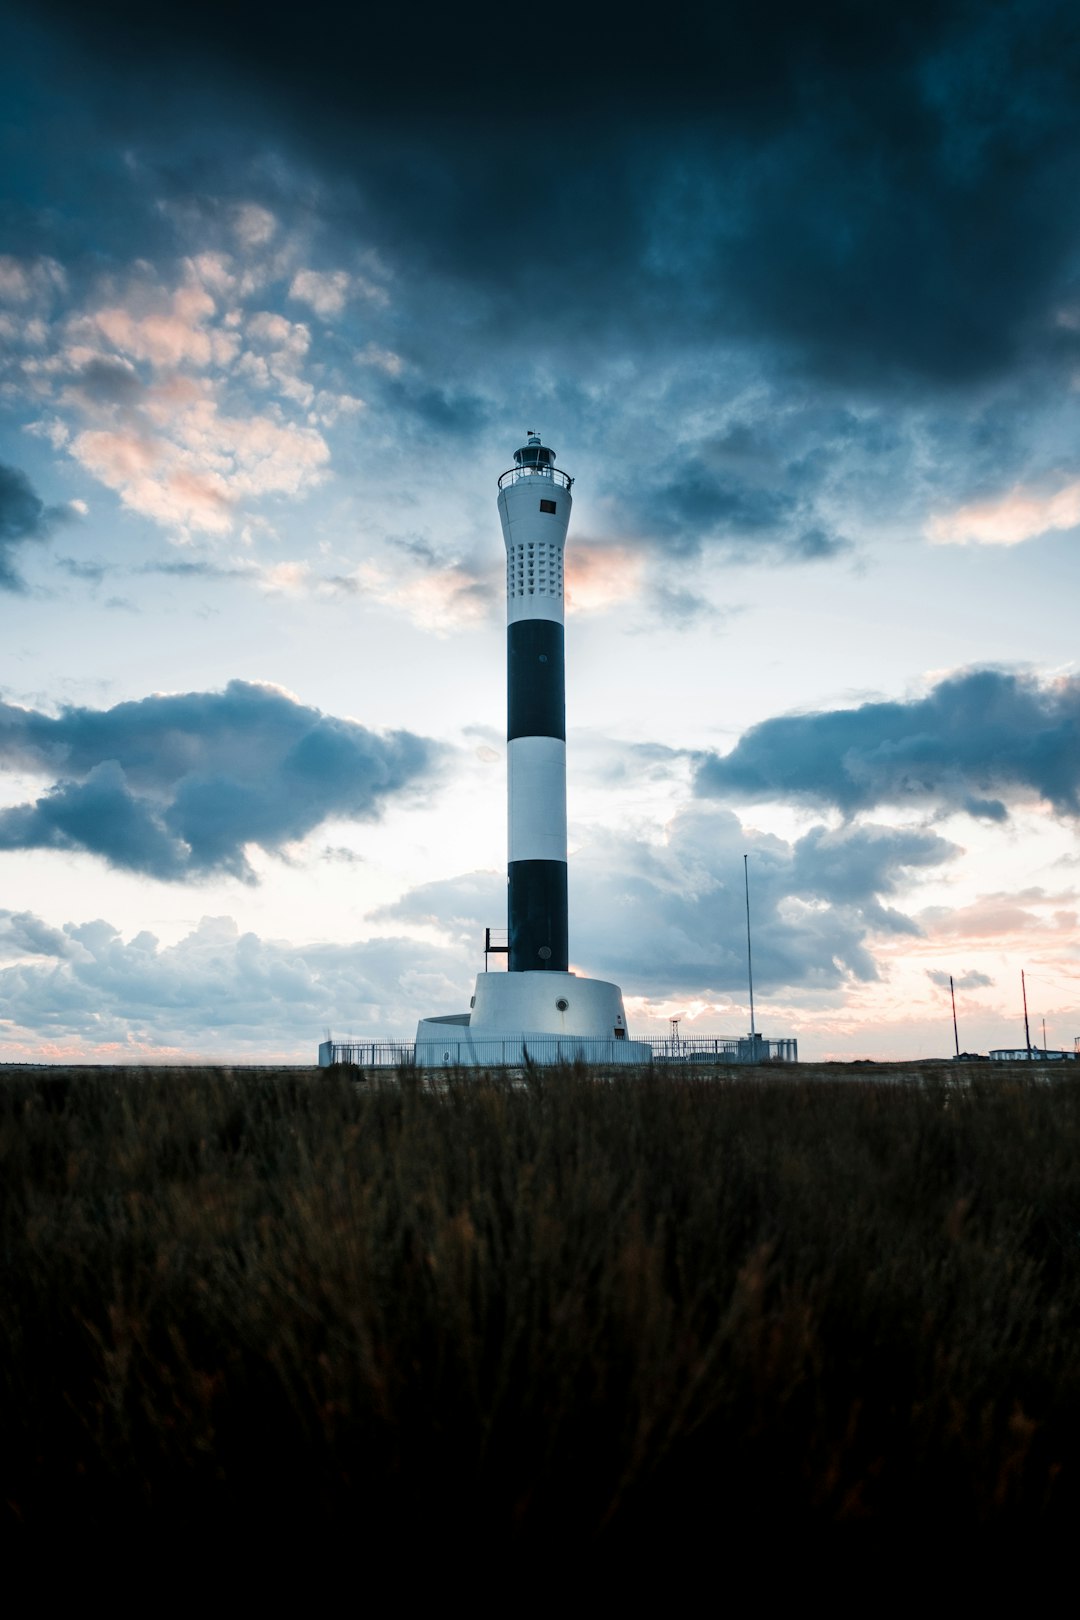 travelers stories about Landmark in Dungeness, United Kingdom